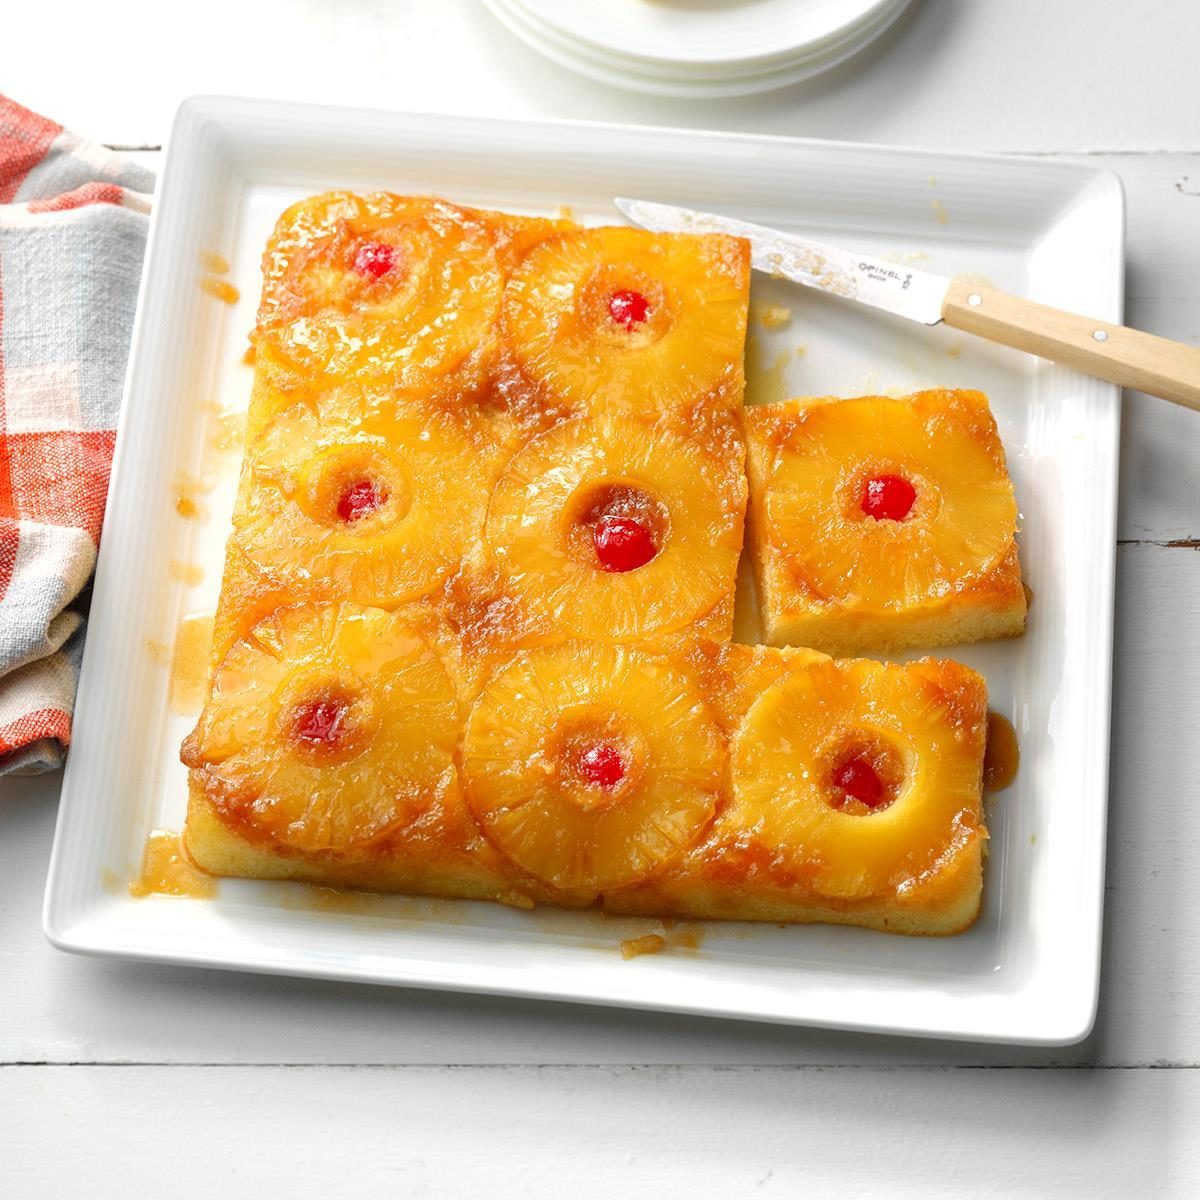 Makeover Pineapple Upside-Down Cake Recipe: How to Make It | Taste of Home